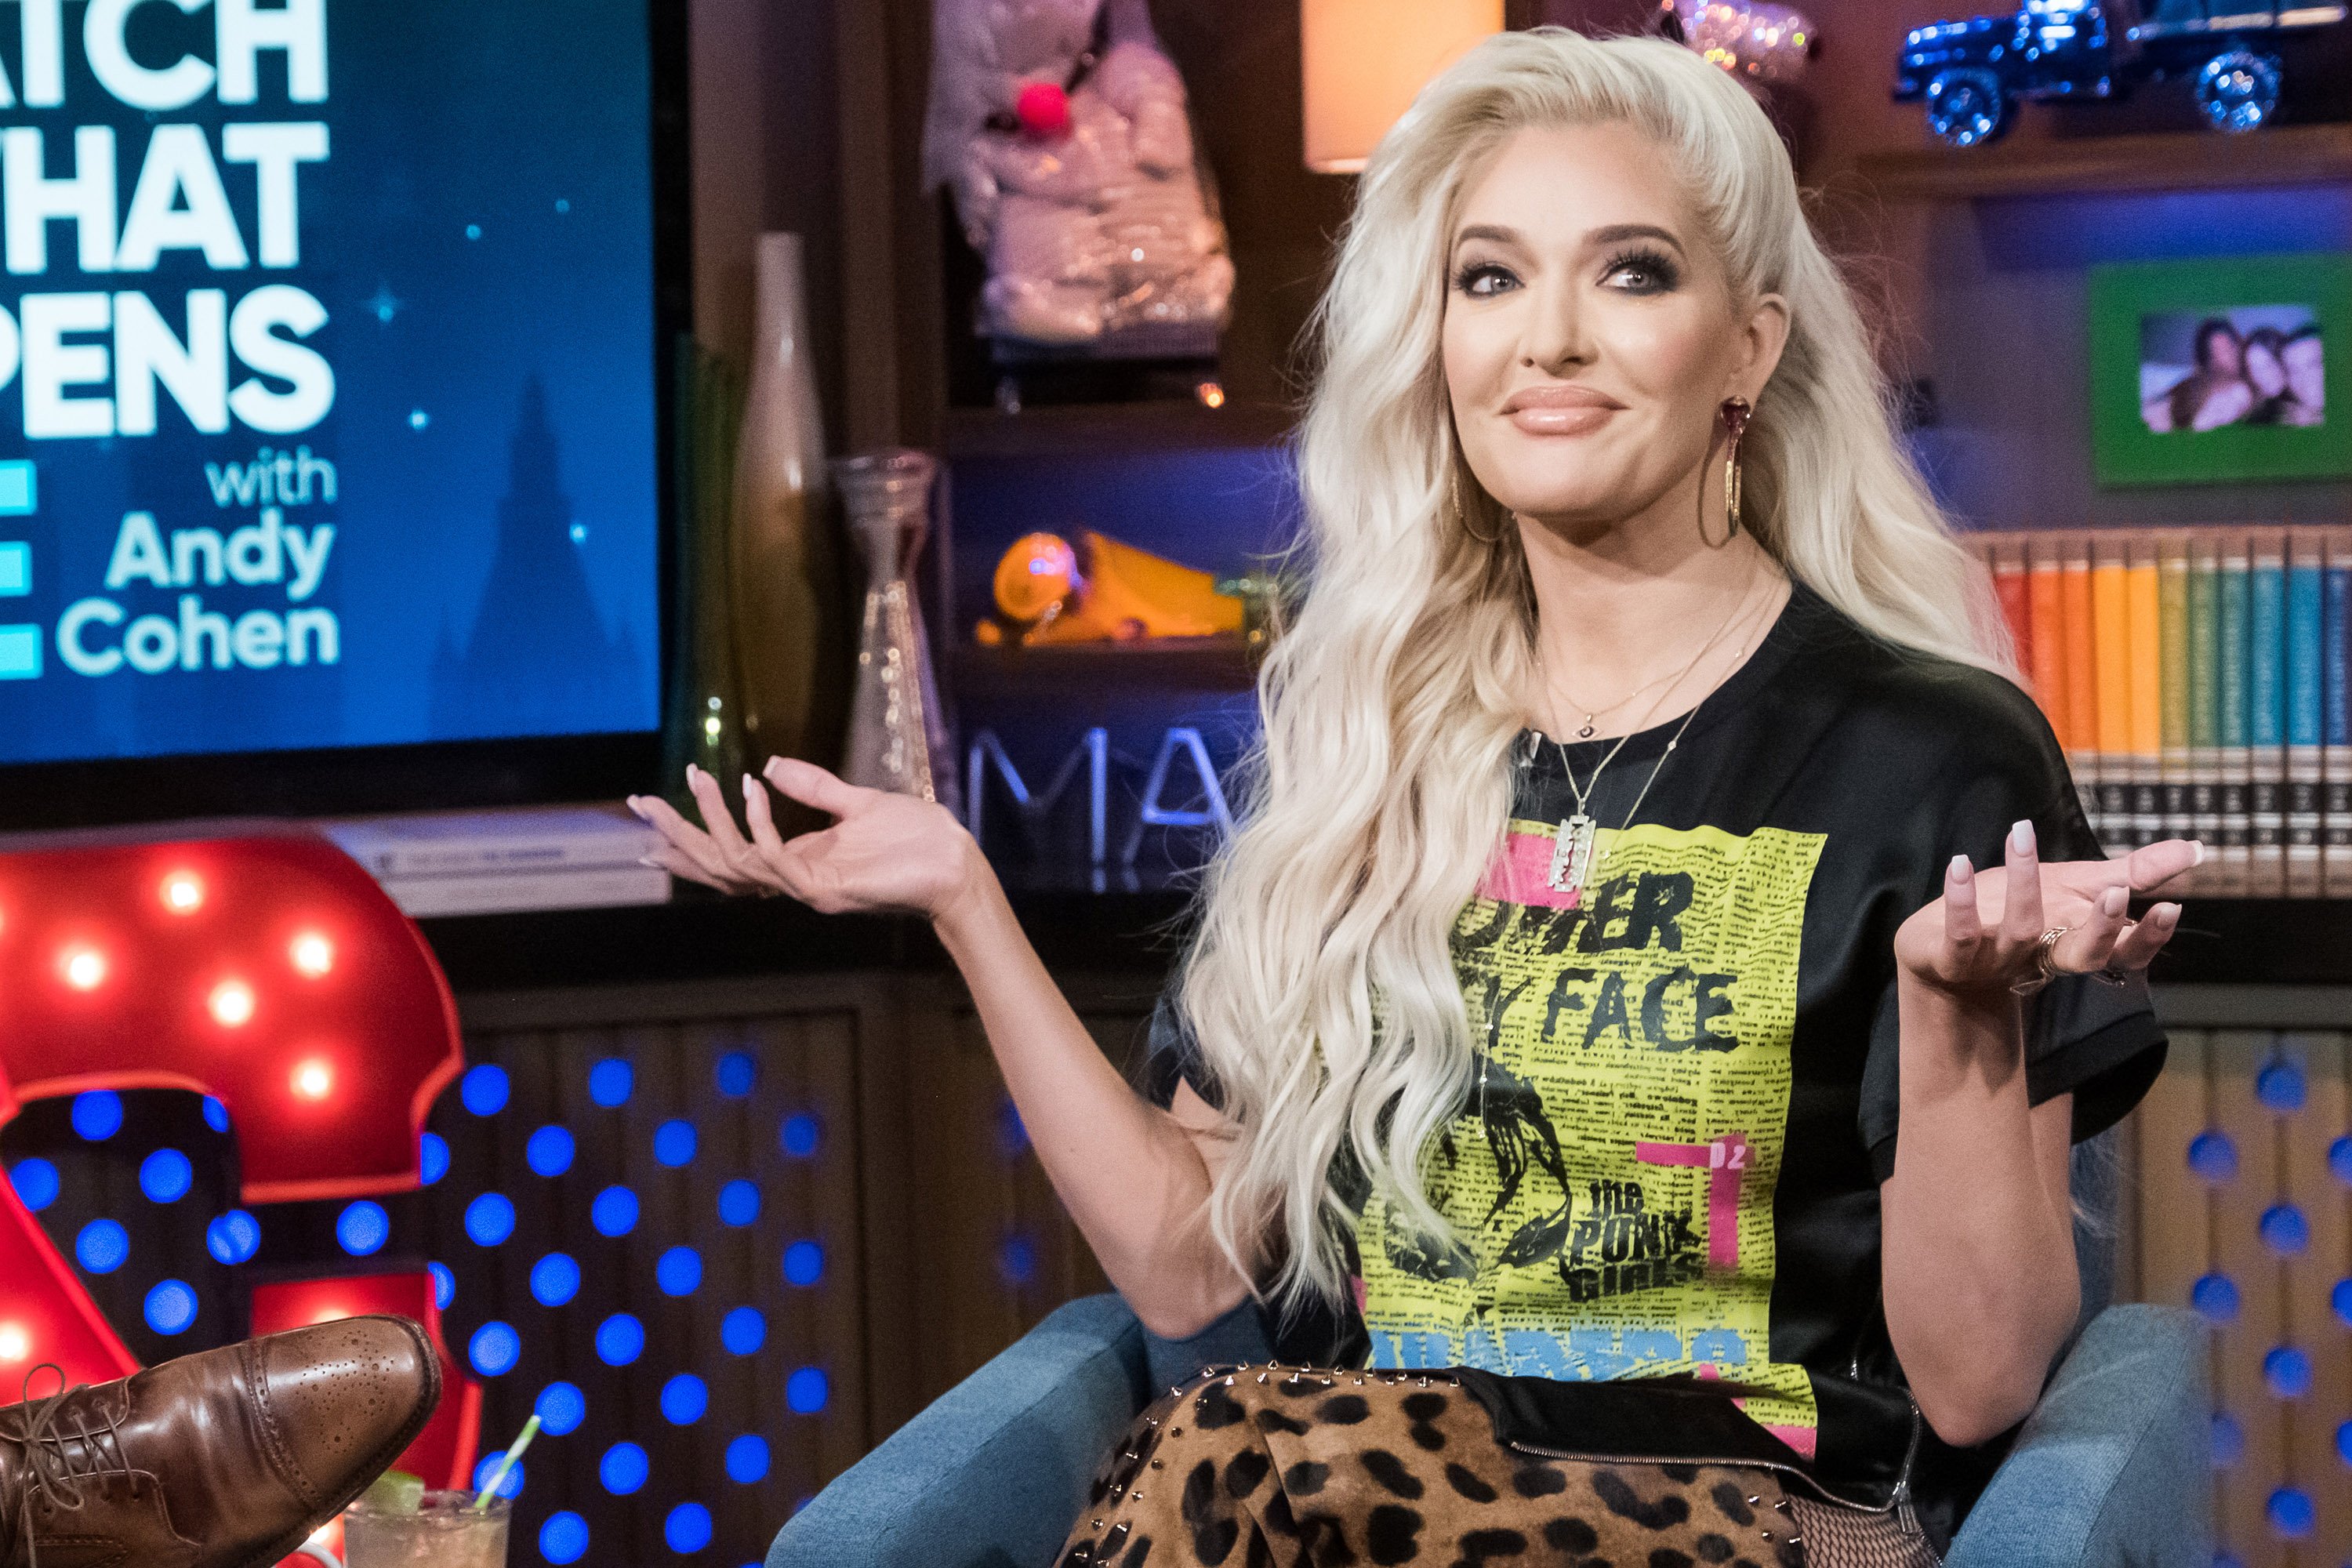 'Real Housewives of Beverly Hills' star Erika Jayne smirking with her hands in the air during an appearance on 'Watch What Happens Live'